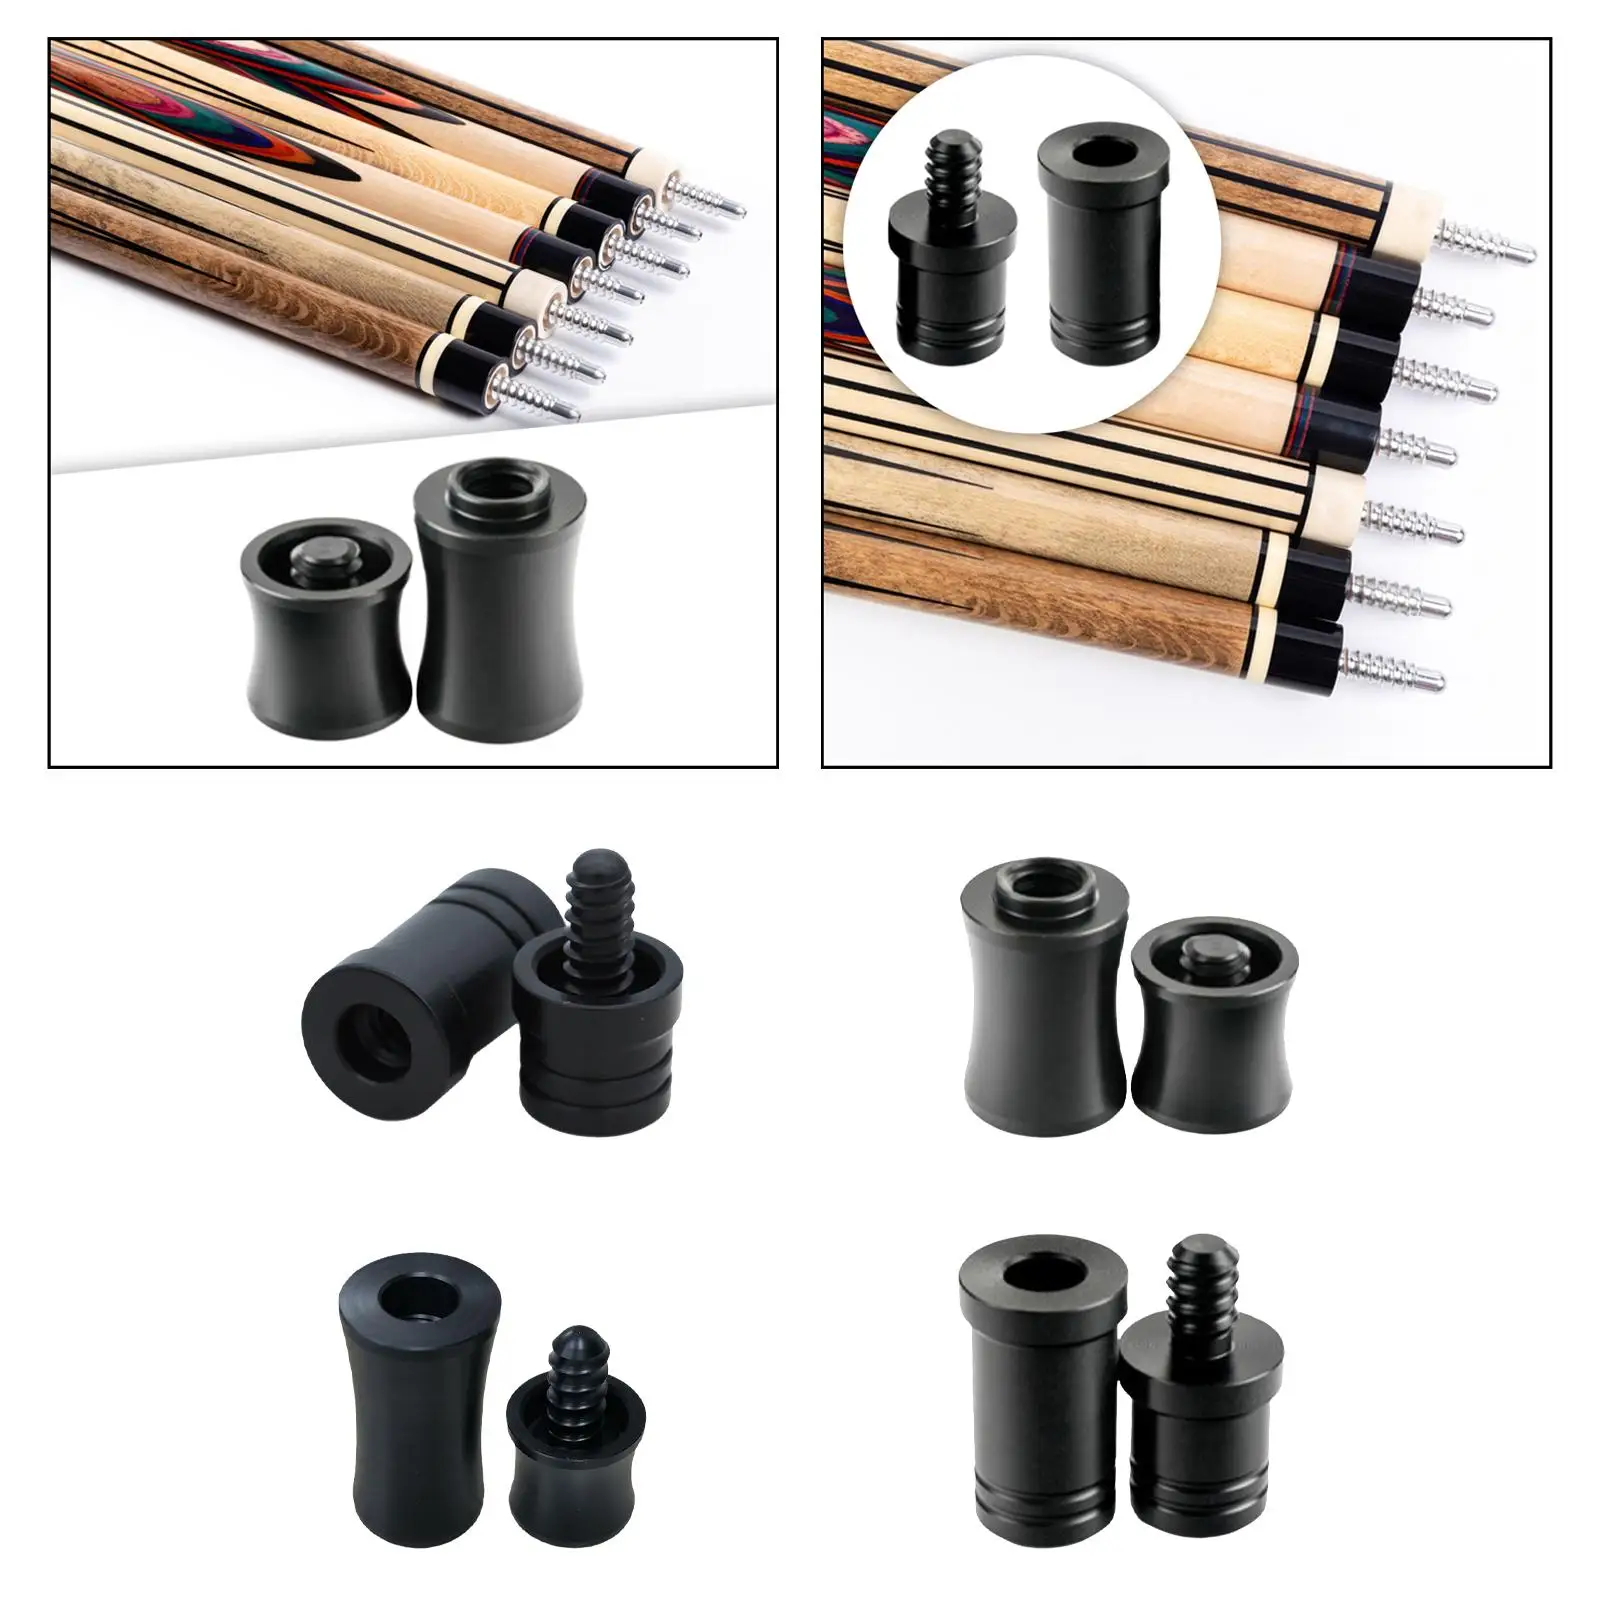 

Pool Cue Joint Protector Ergonomic Design Joint Cap Replacement Pool Cue Tip Tools Billiards Accessories Protect Your Cue Stick